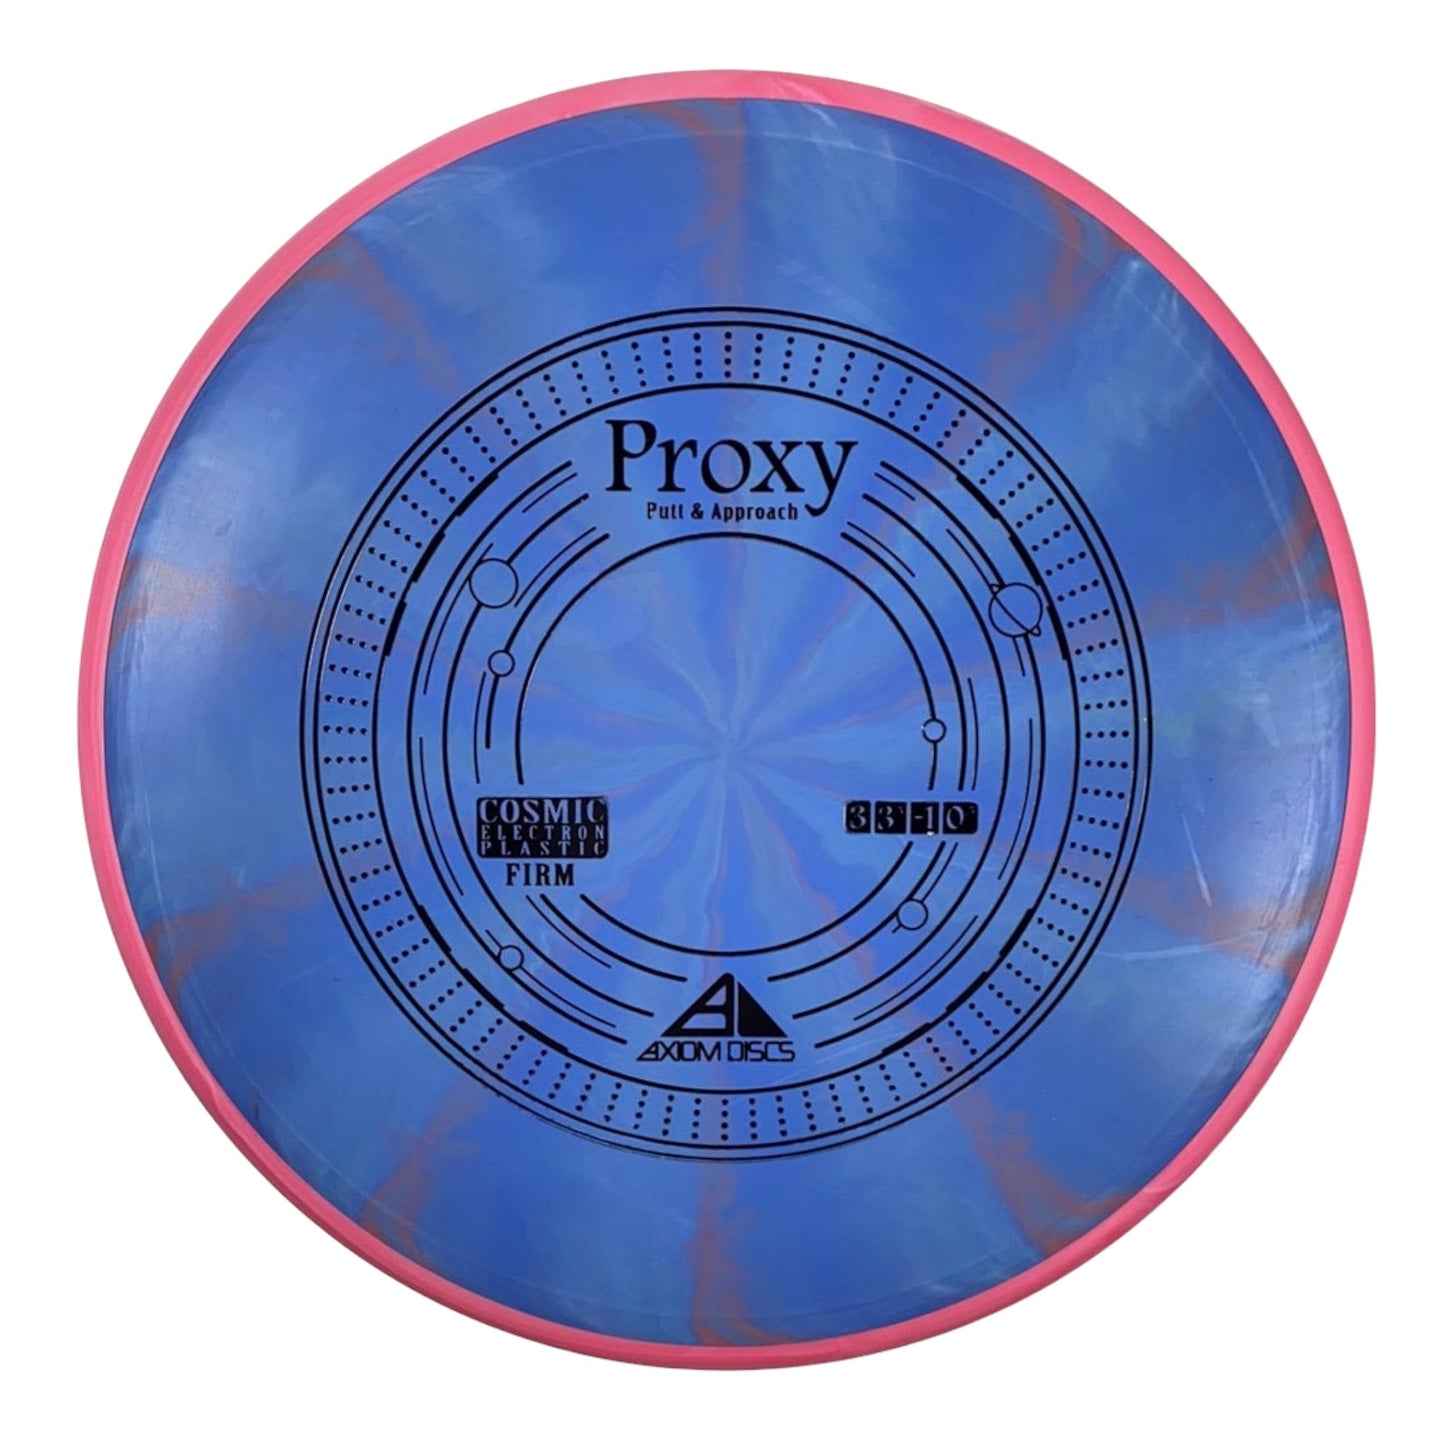 Axiom Discs Proxy | Cosmic Electron Firm | Blue/Pink 172g